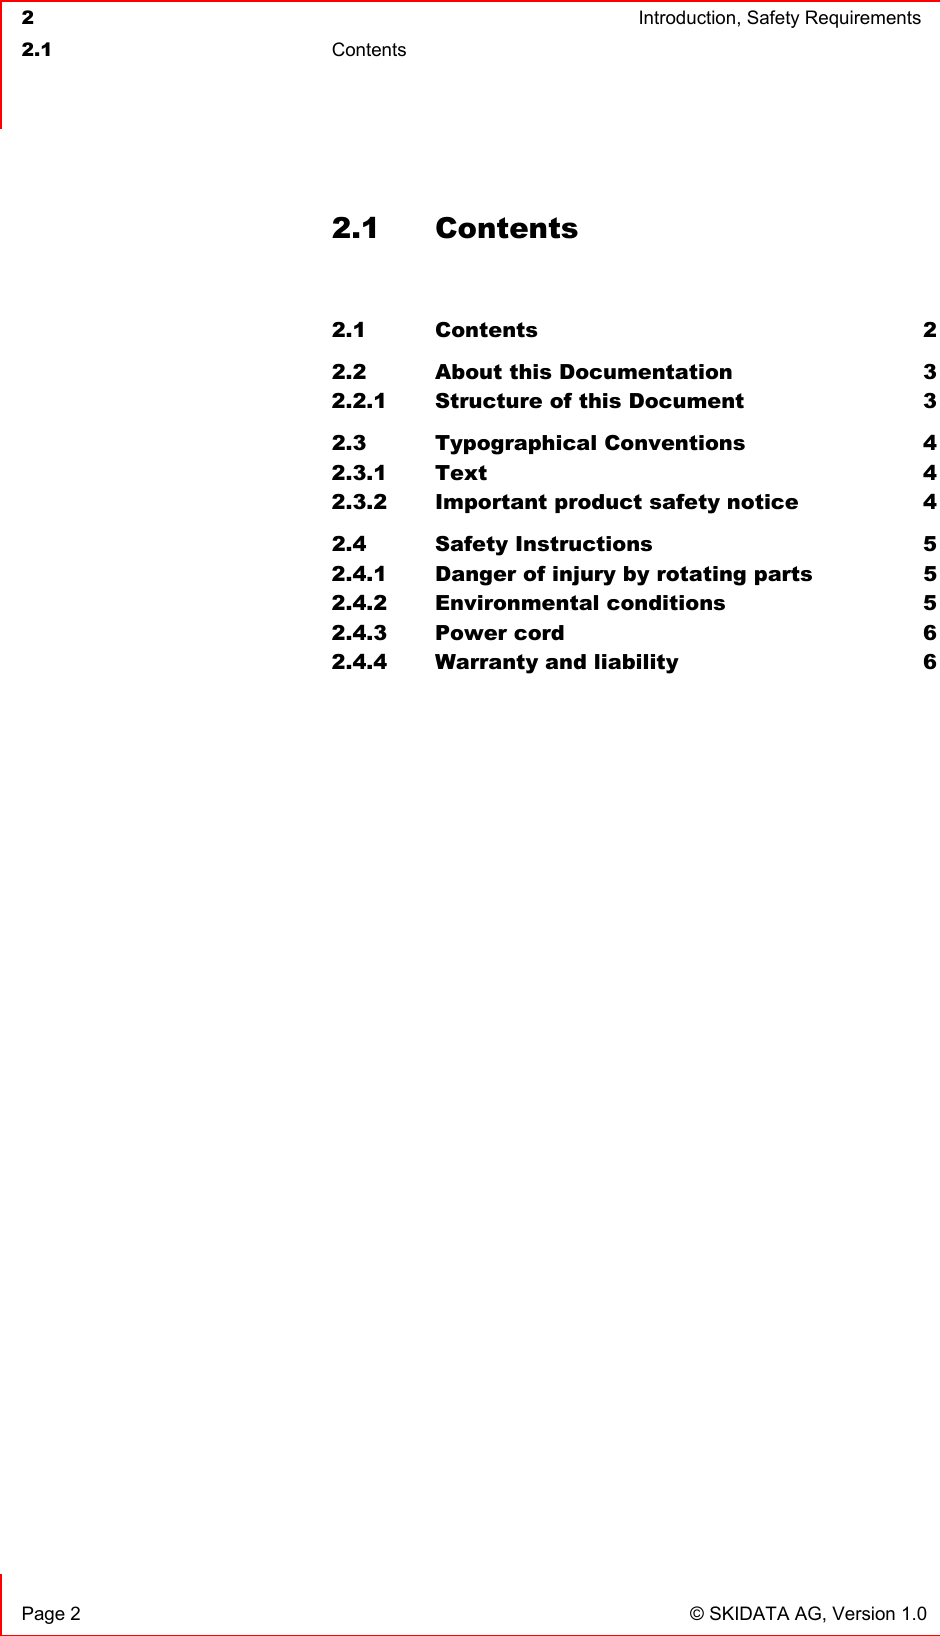  2  Introduction, Safety Requirements  2.1 Contents    Page 2  © SKIDATA AG, Version 1.0 2.1 Contents  2.1 Contents 2 2.2 About this Documentation  3 2.2.1 Structure of this Document  3 2.3 Typographical Conventions  4 2.3.1 Text 4 2.3.2 Important product safety notice  4 2.4 Safety Instructions  5 2.4.1 Danger of injury by rotating parts  5 2.4.2 Environmental conditions  5 2.4.3 Power cord  6 2.4.4 Warranty and liability  6  